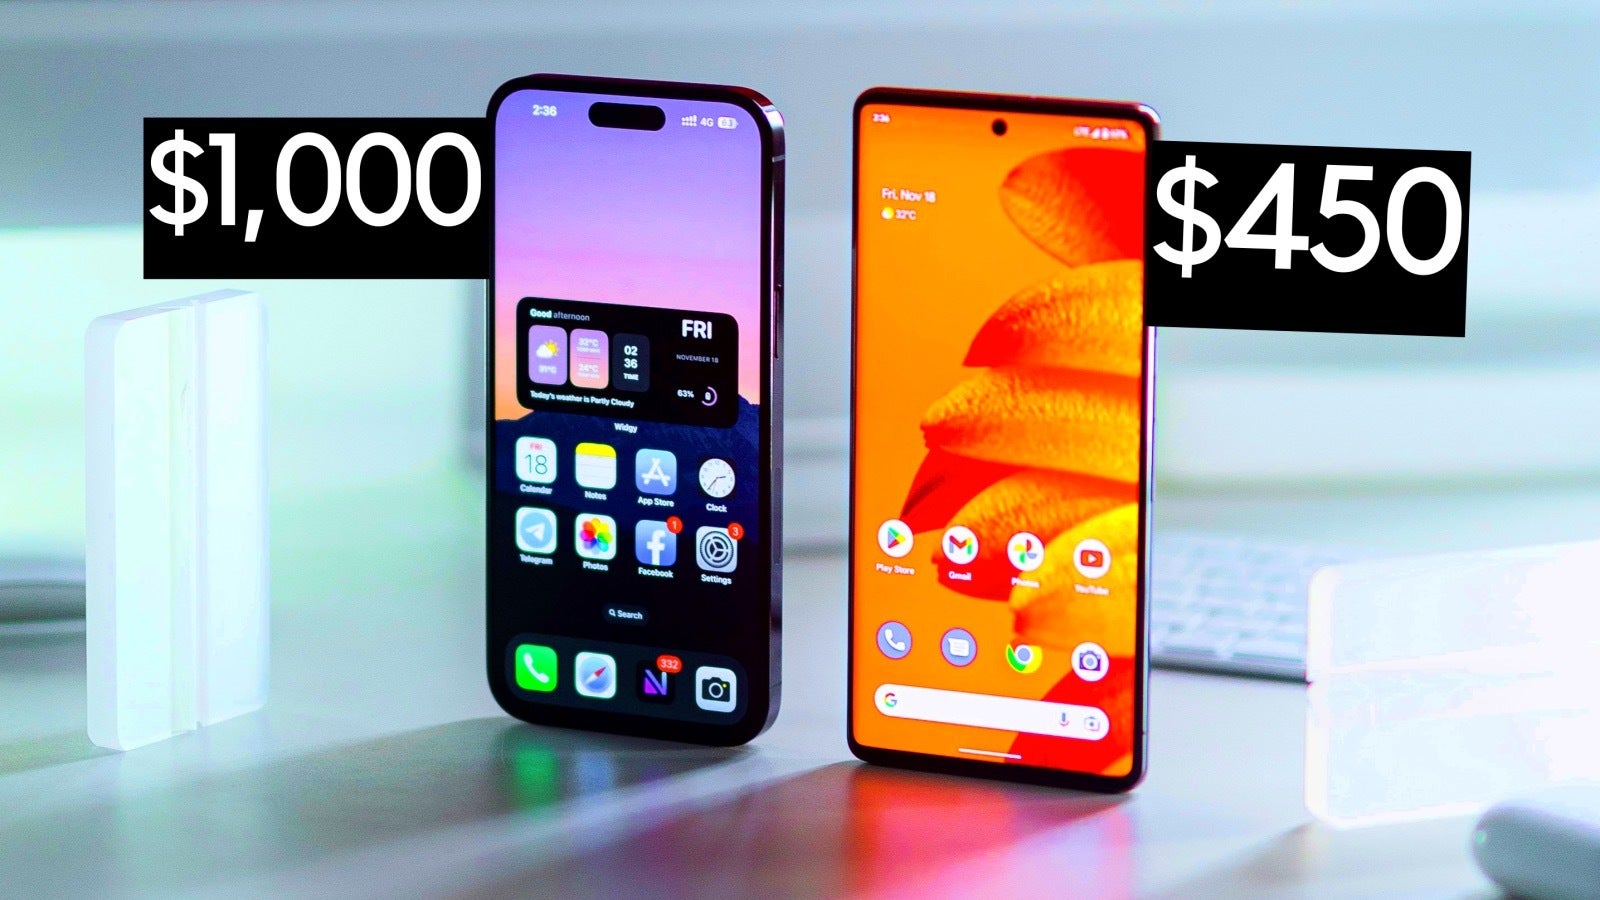 2024 is 2024. As far as 2023 is concerned, I still expect the upcoming Pixel 7a to be the best-value phone of the year. - Apple declaring war on budget Android phones! Low-cost iPhone SE 4 to end Samsung-Google rule